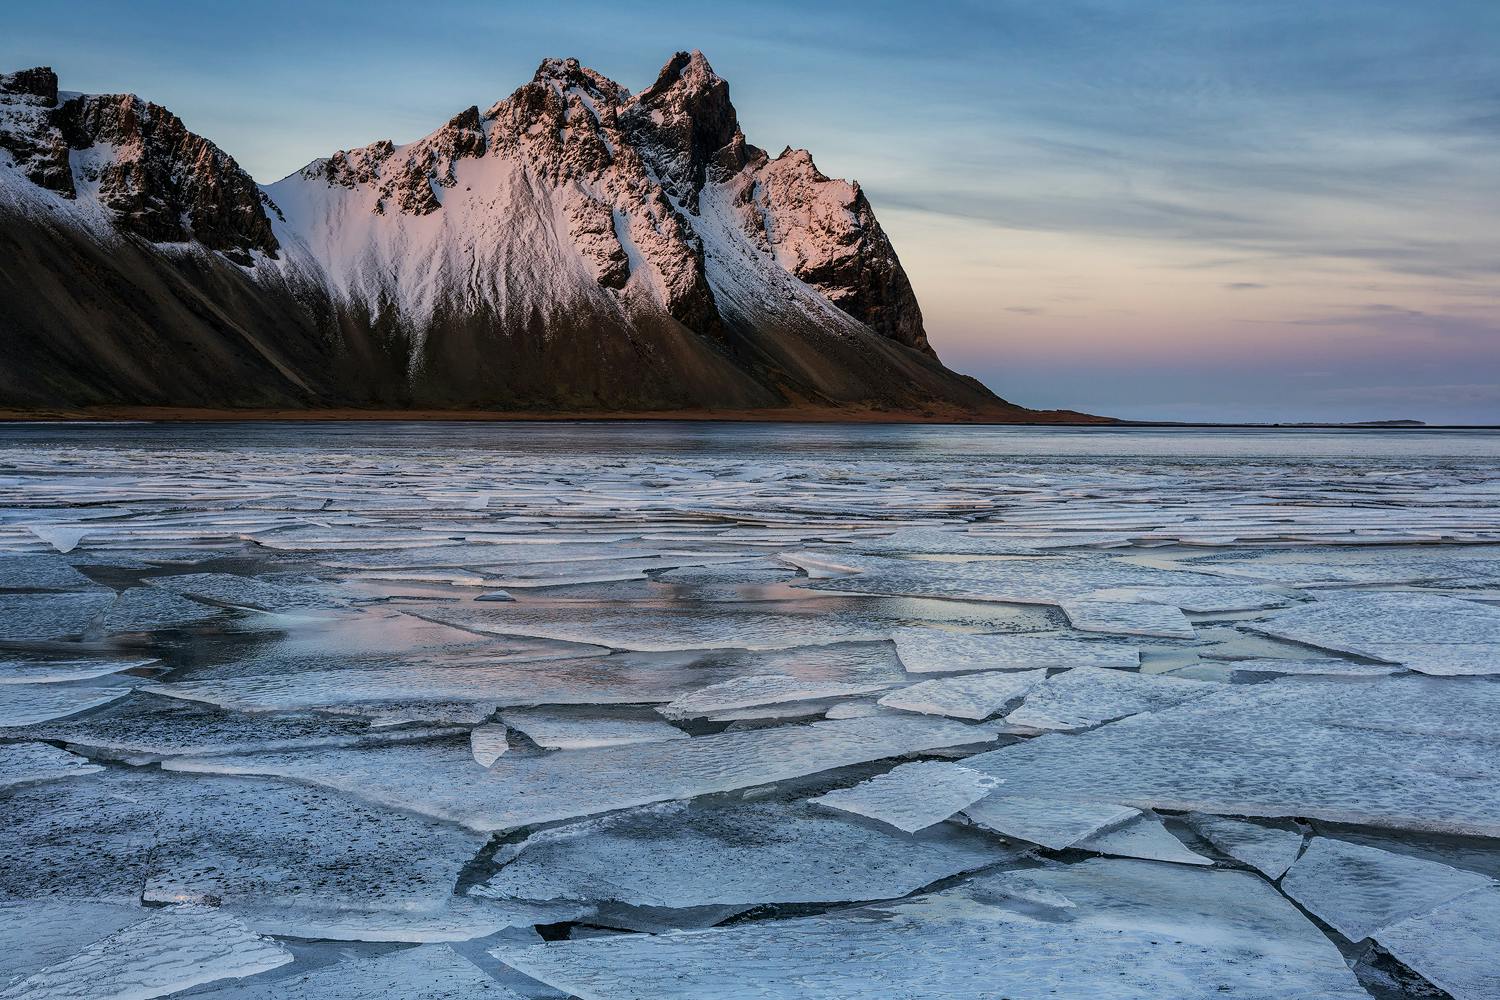 The dramatic Vestrahorn mountain in a sea of ice.